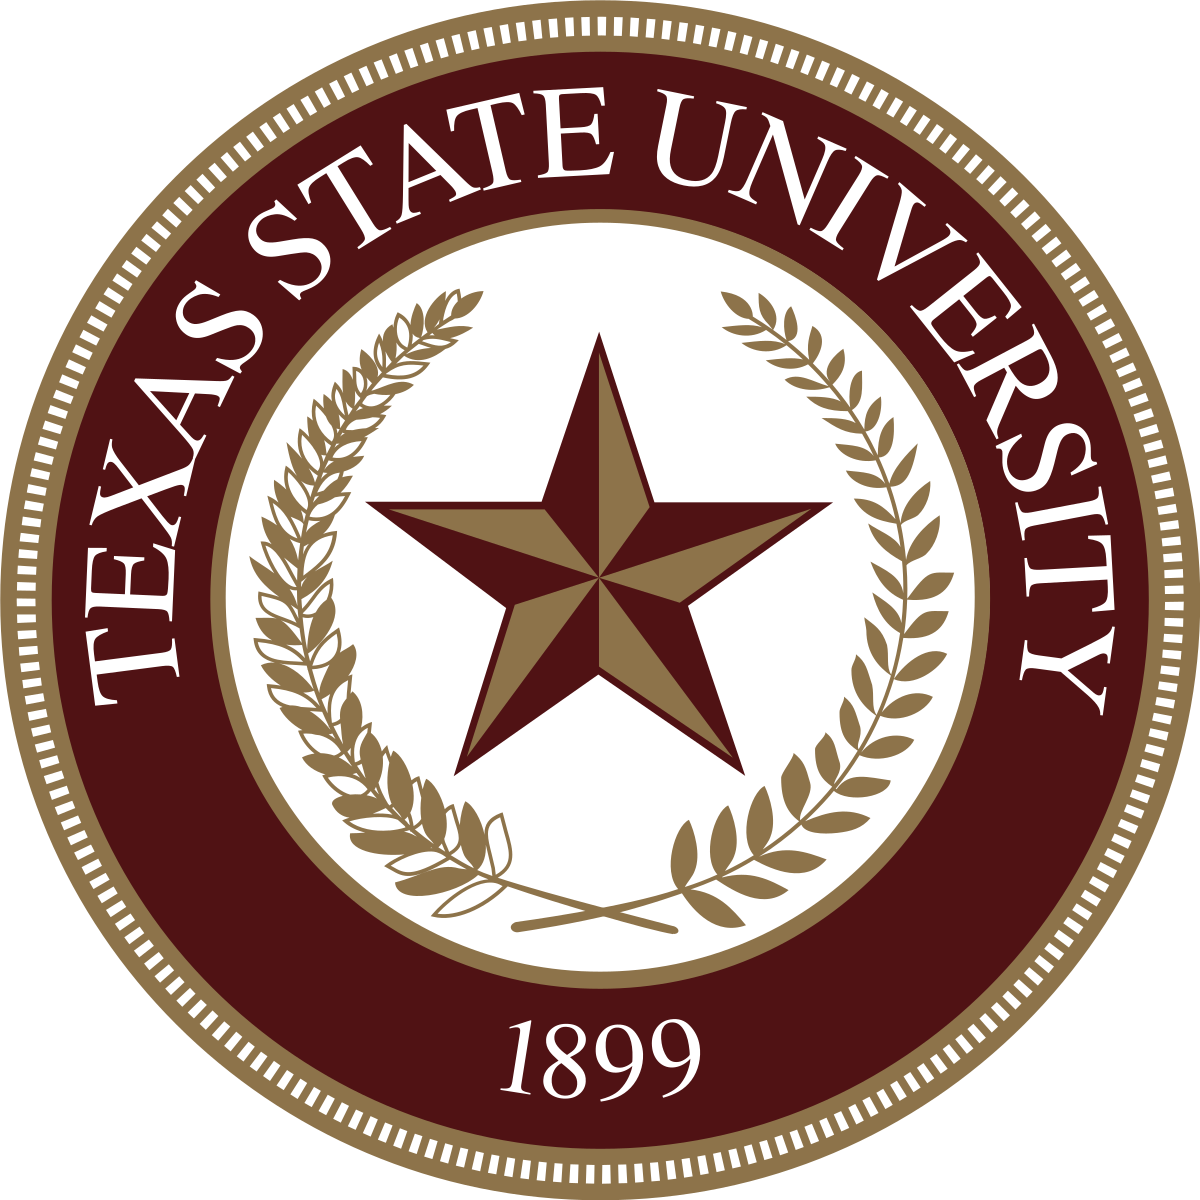 Texas State Univeristy Seal